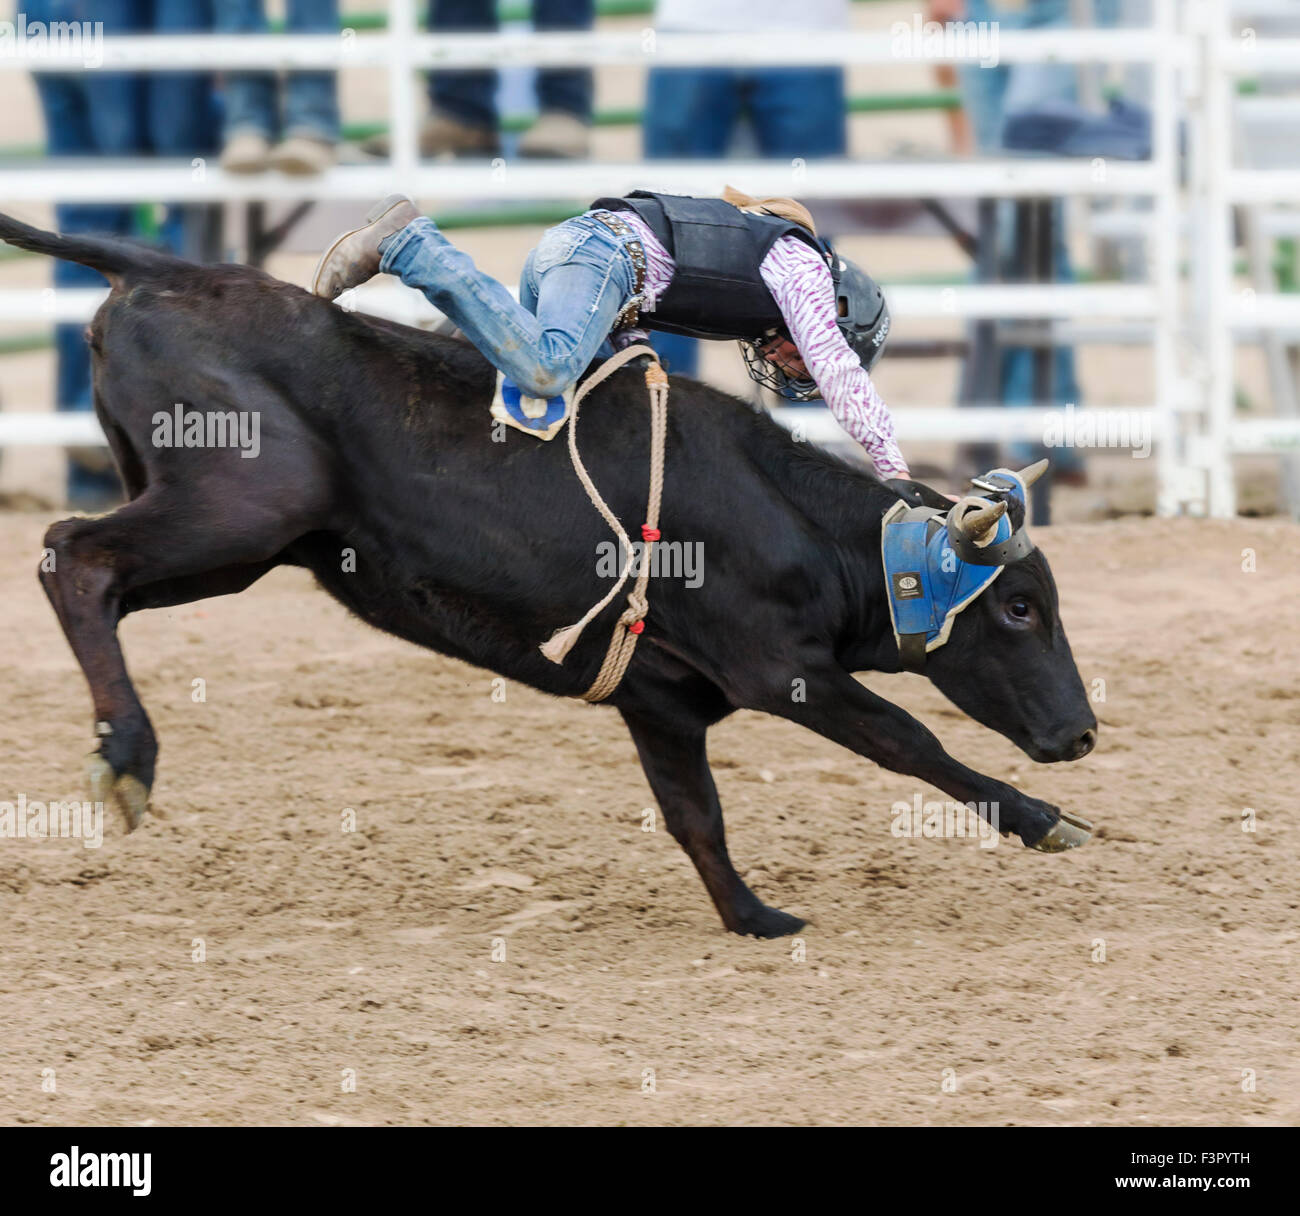 Young cowboy falling from a small steer in the Junior Steer Riding competition, Chaffee County Fair & Rodeo, Salida, Colorado Stock Photo